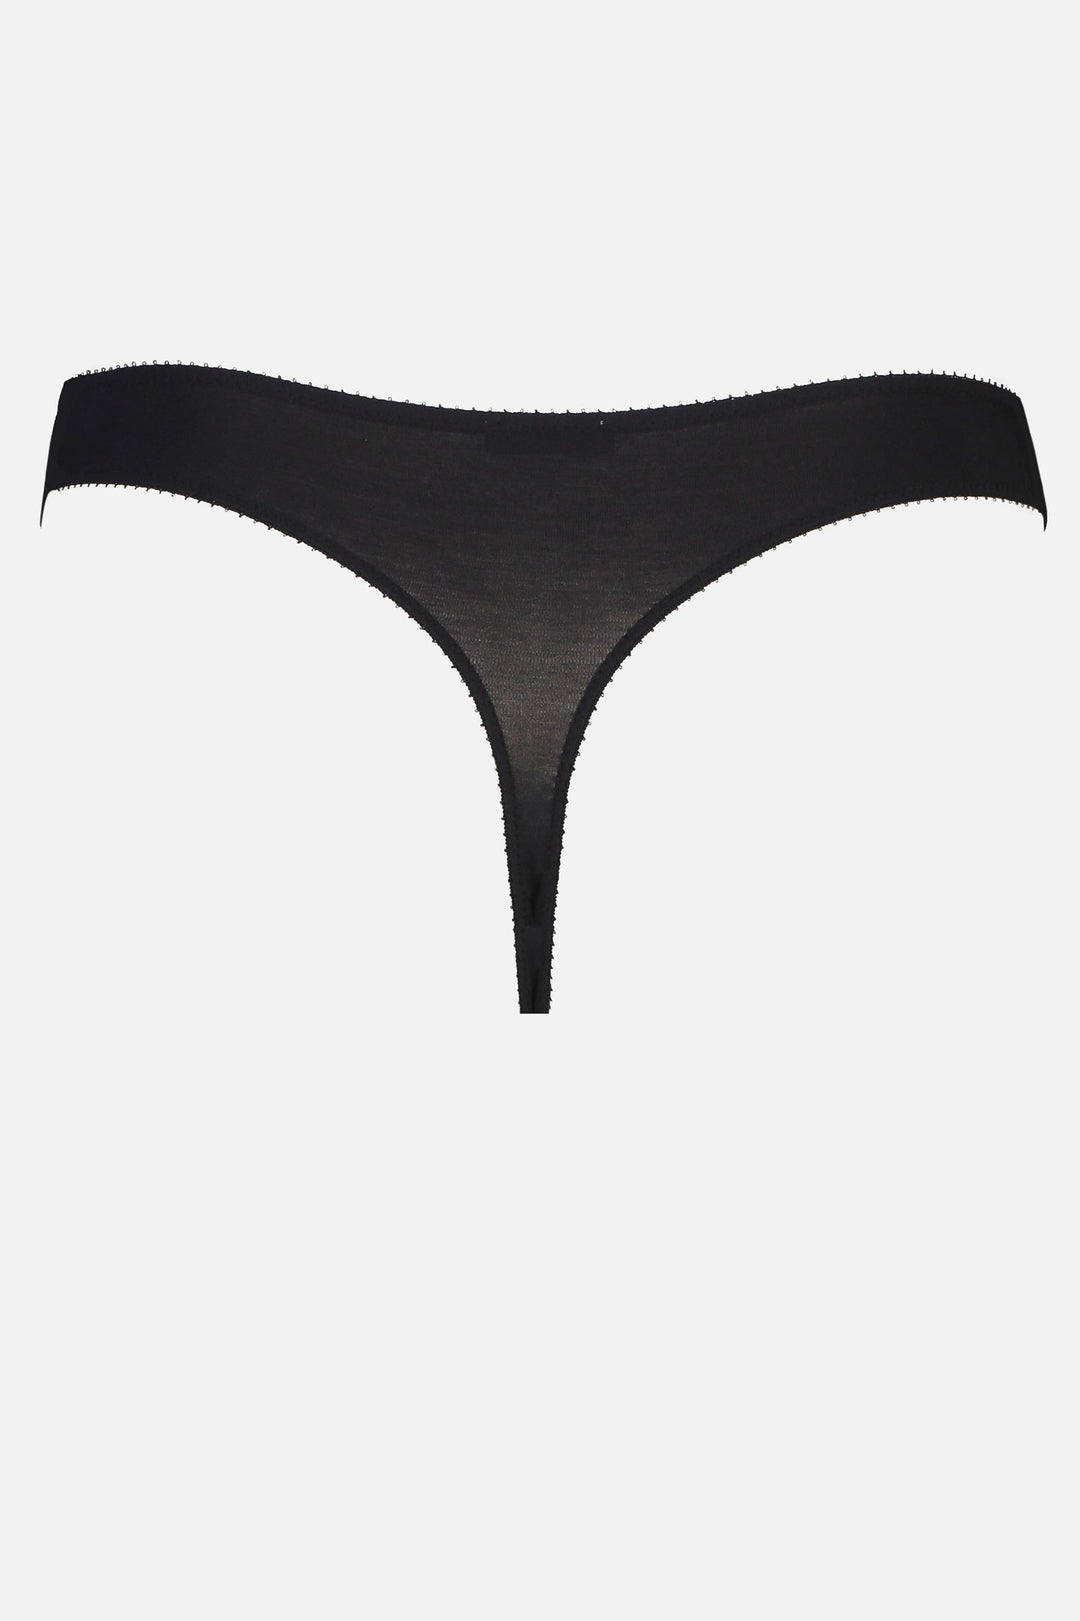 Videris Lingerie thong in black TENCEL™ a comfortable flattering wide g string back with soft elastics